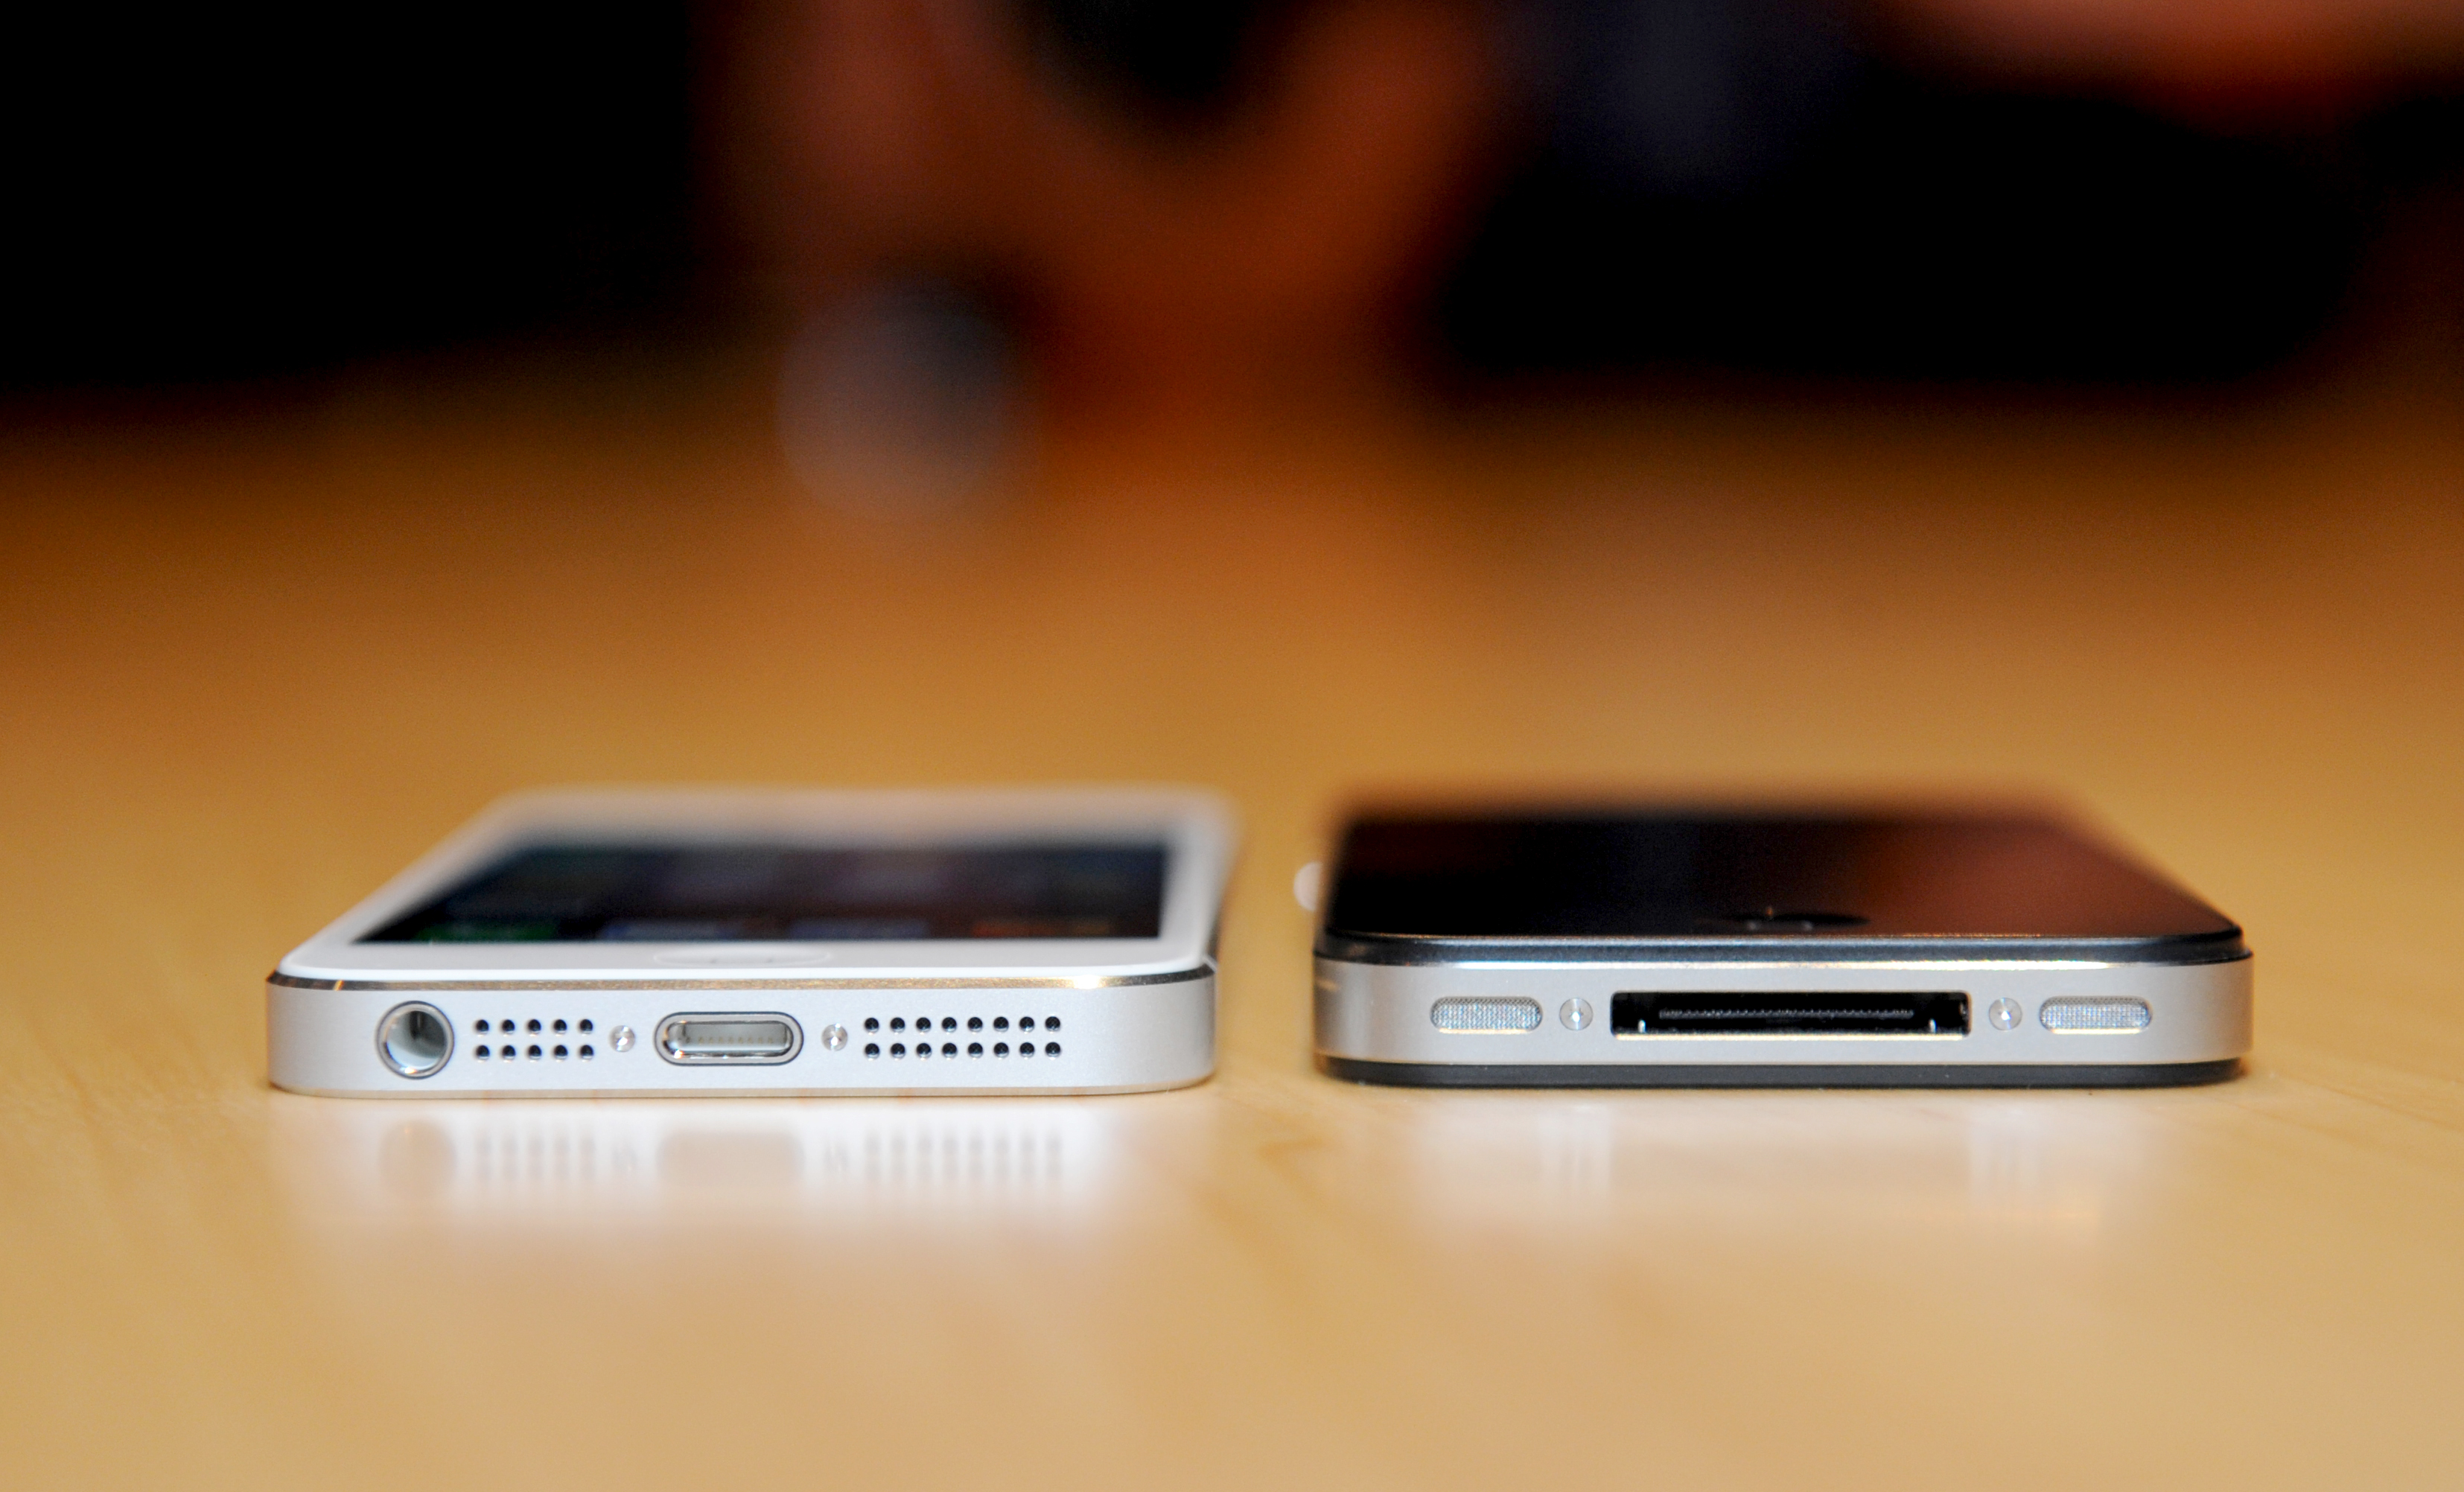 Applie iPhone 5 (left) and 4s (right)